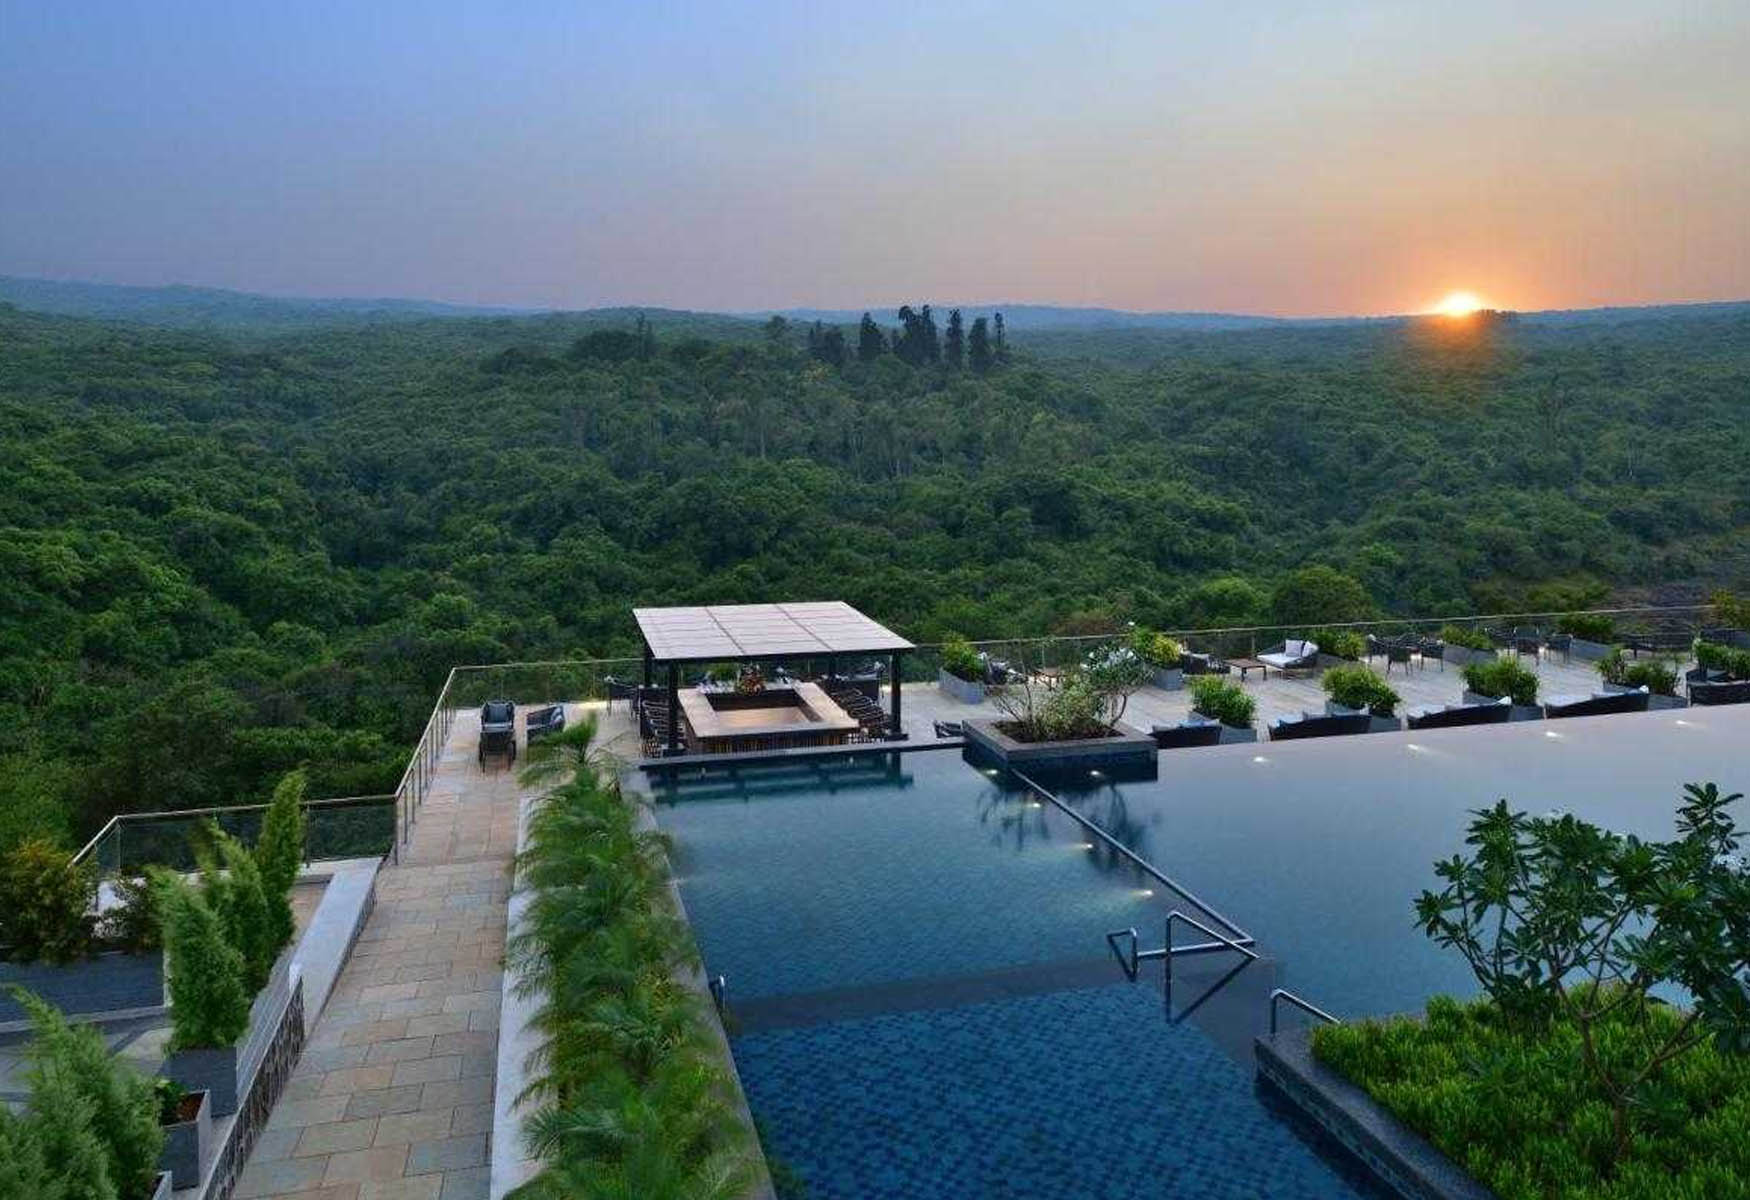 Where To Stay In Mahabaleshwar: The BEST Areas